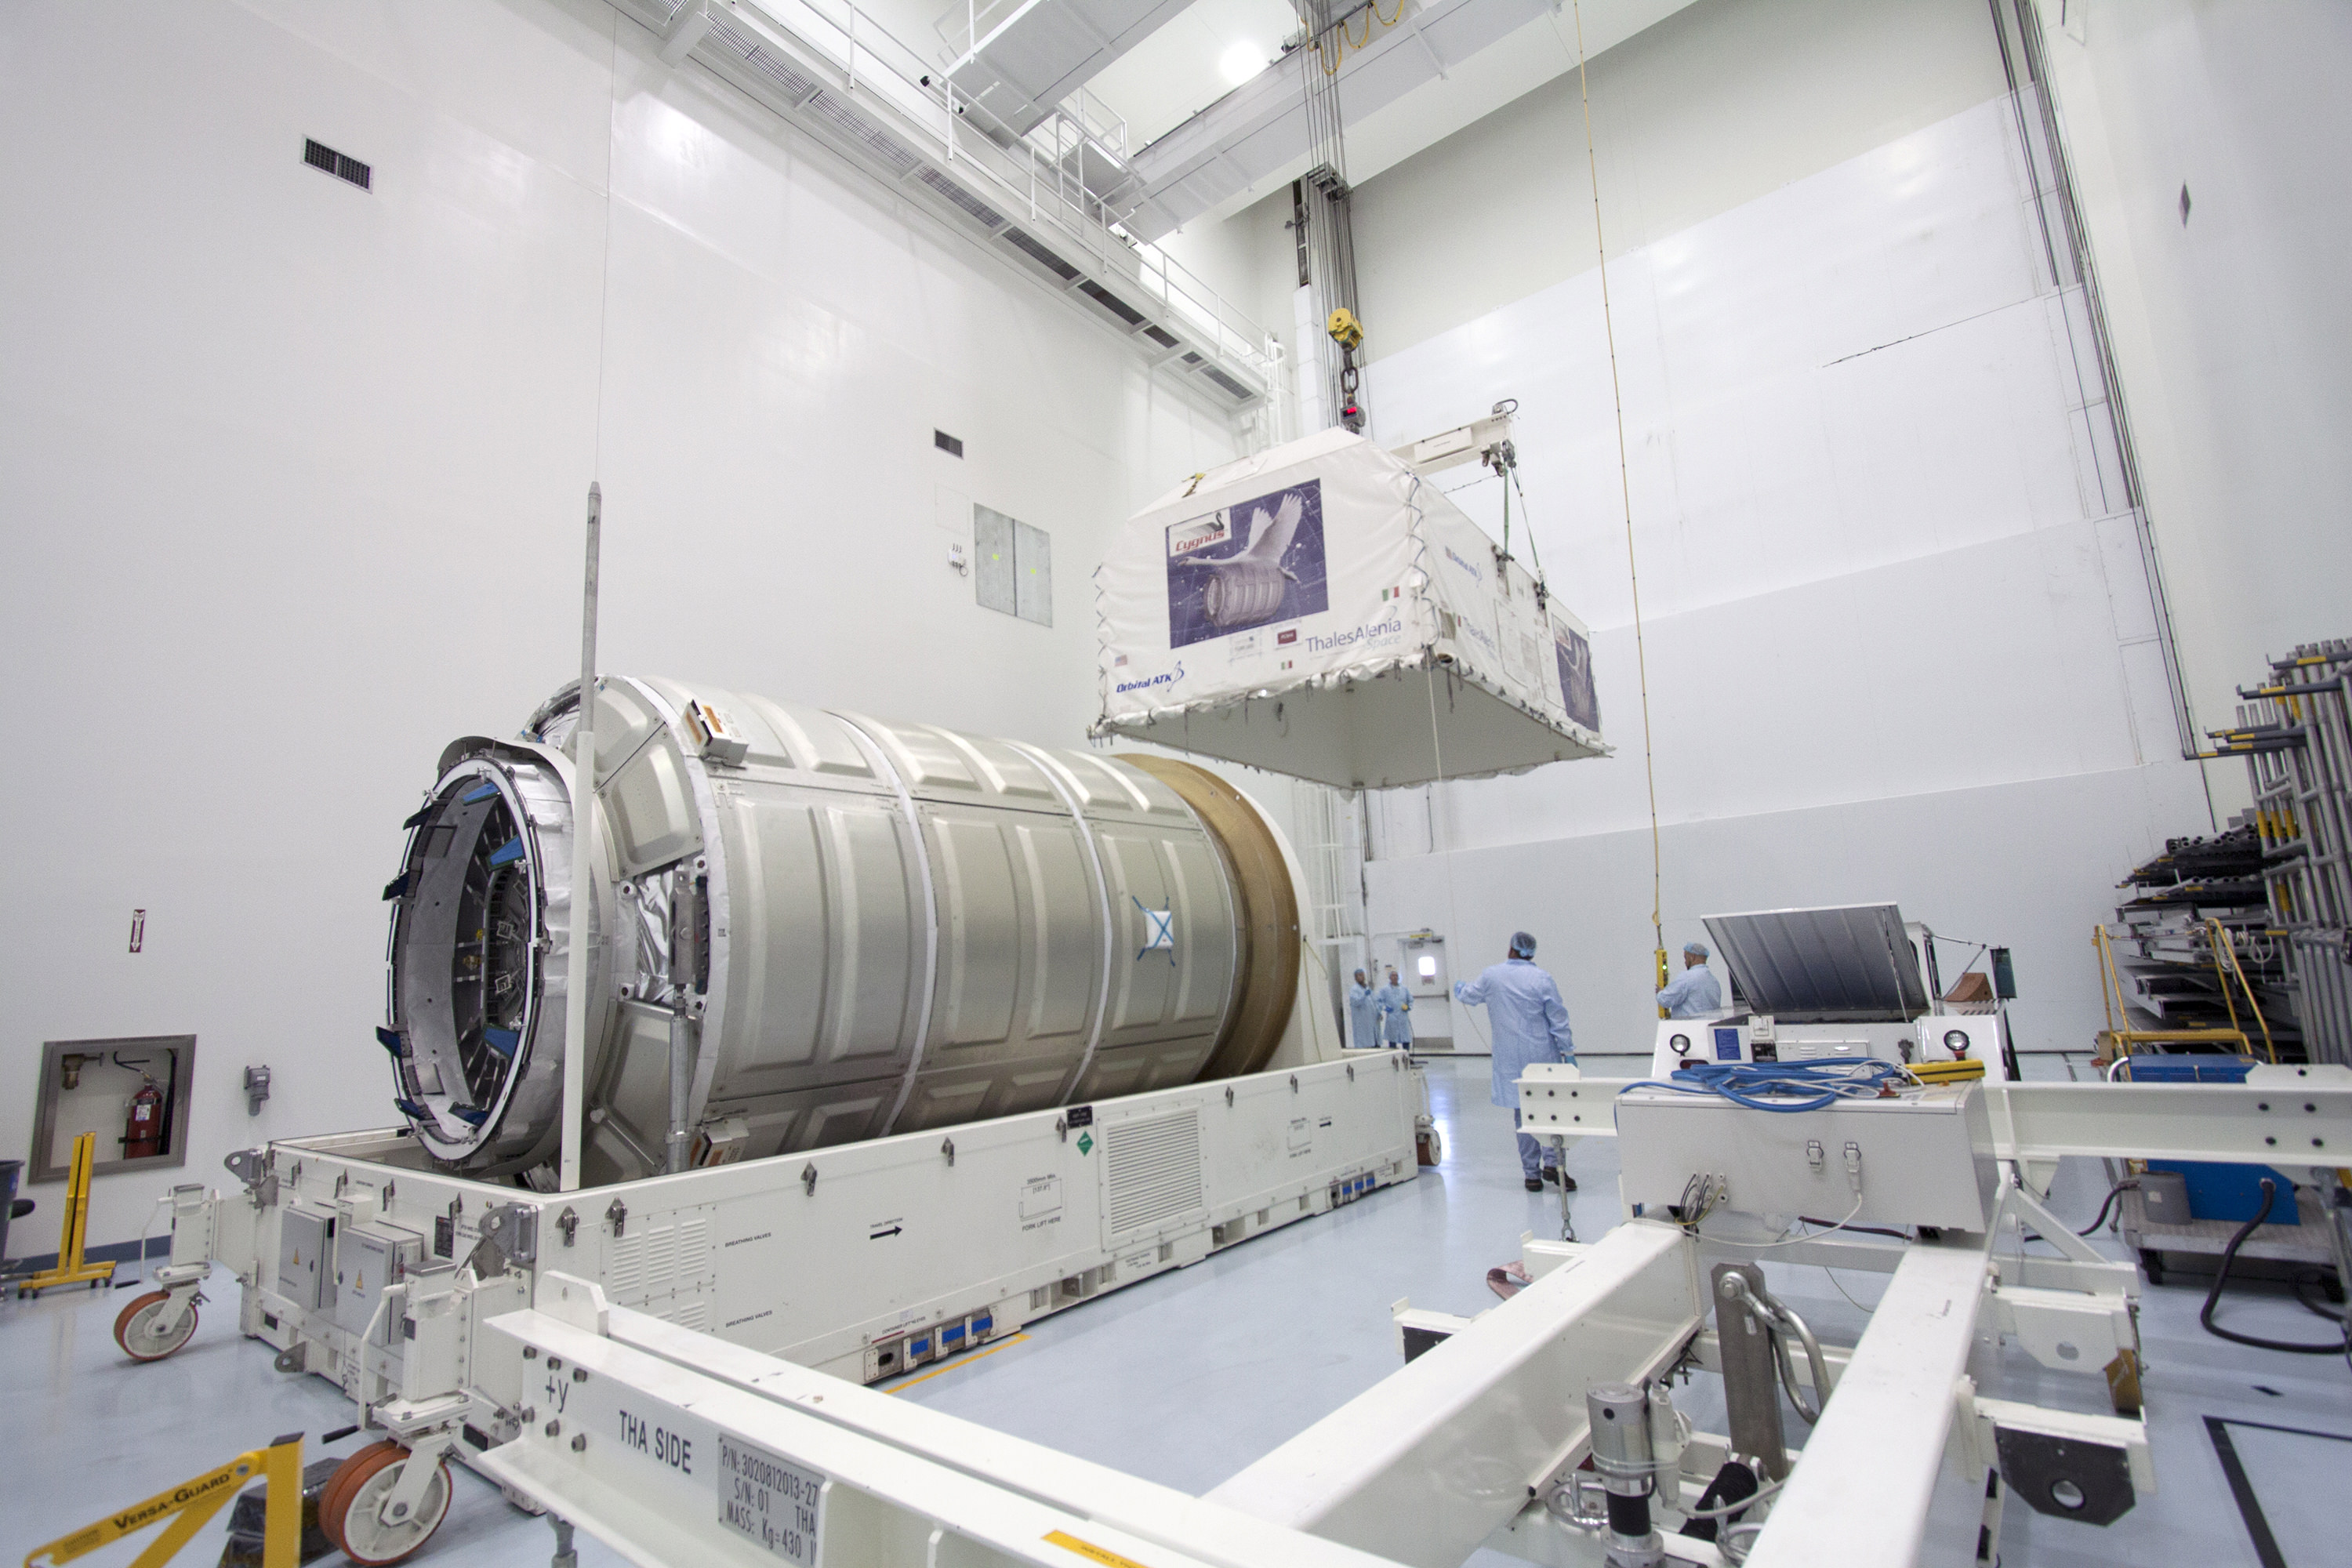 Orbital ATK Cygnus pressurized module unveiled inside Space Station Processing Facility at Kennedy Space Center in Florida as engineers remove shipping container. The module will be joined to the Cygnus service module before launch in December 2015. Photo credit: NASA/Jim Grossmann